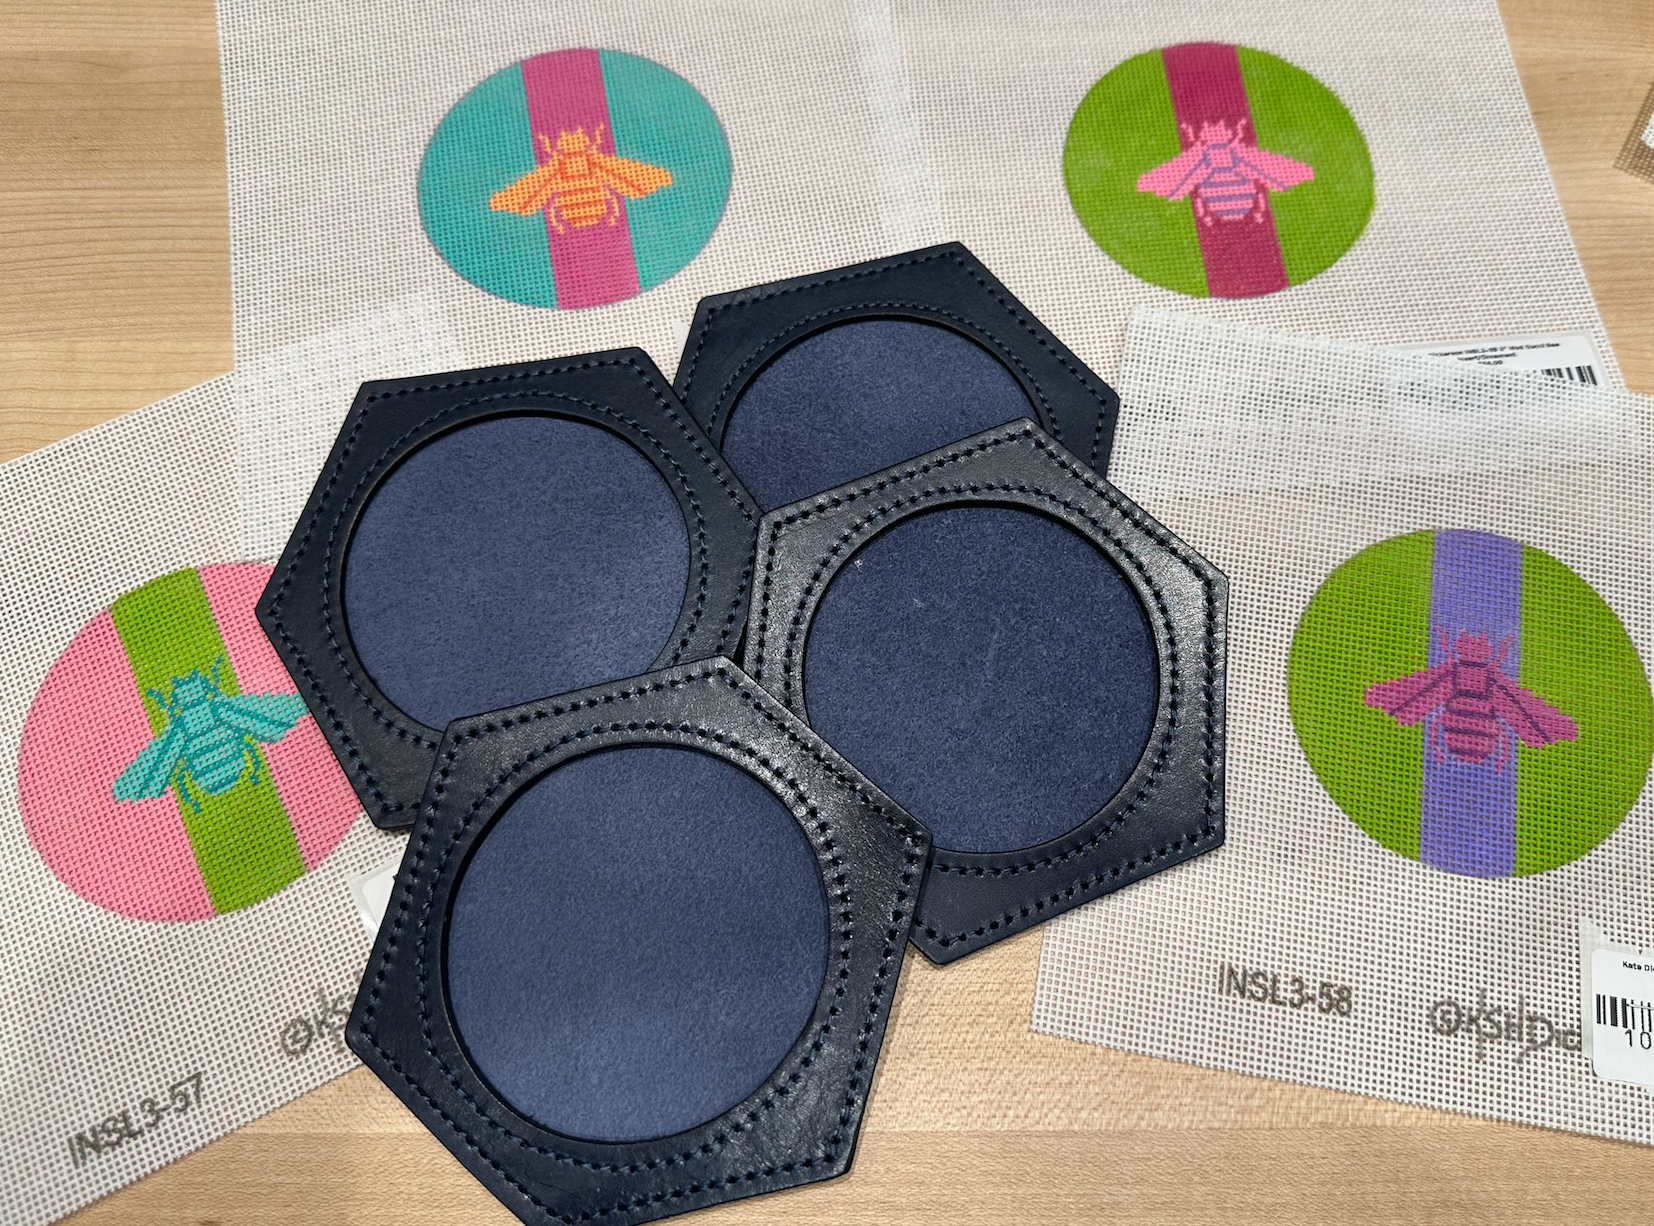 Meredith Collection Blue Leather Coasters - takes 3&quot; Round Insert (Set of 4)